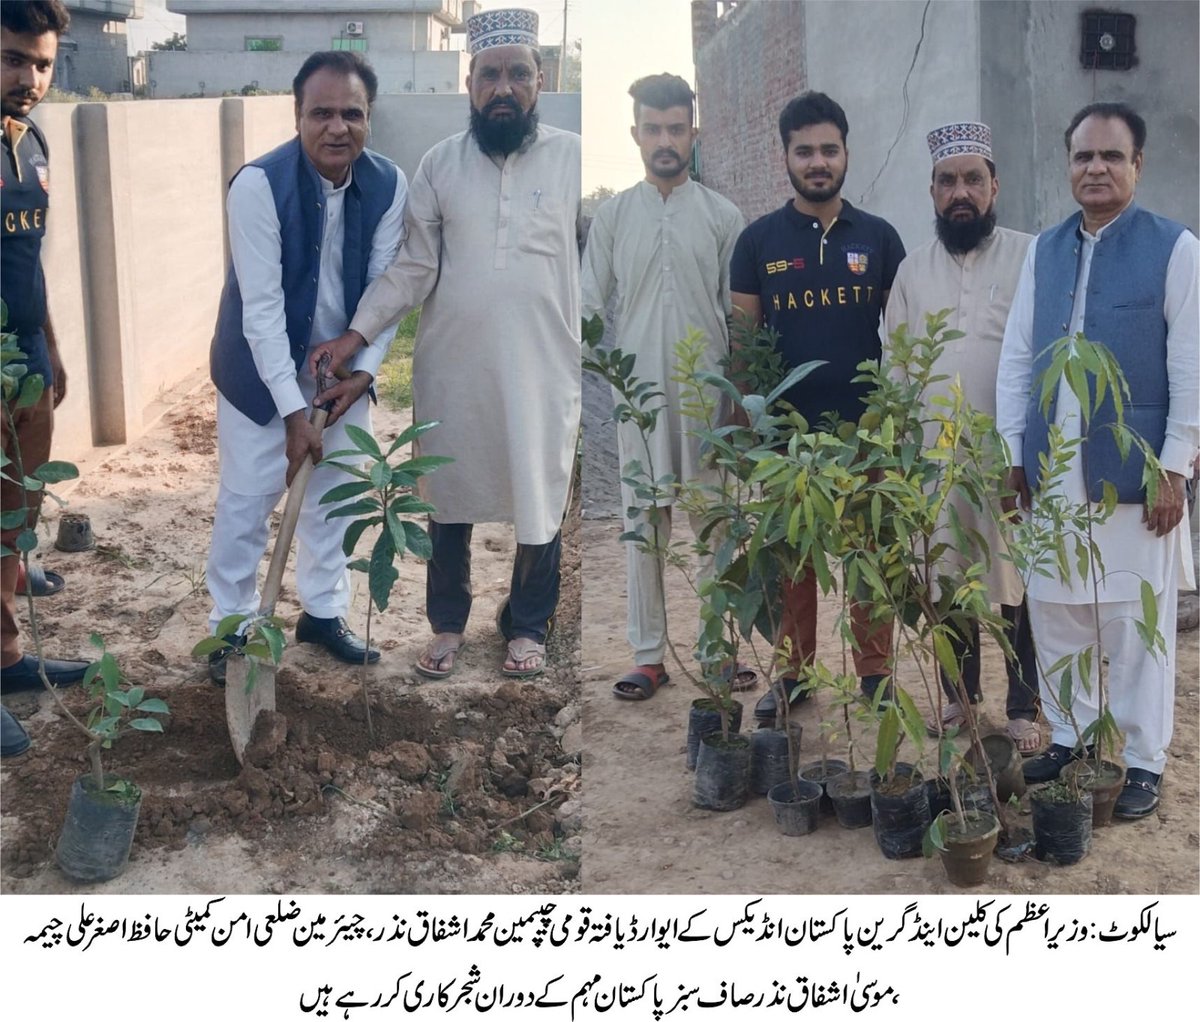 Champion of PM's clean and Green Pakistan Campaign Mussa Ashfaq Planting trees During Clean Green Pakistan.
#ashfaqnazar #choudhrymussa #CleanGreenSialkot #CleanAndGreenPakistan #CleanGreenPakistan
#Climatechange #UNICEF #climateactivist #climateleadership  #climatepolicy